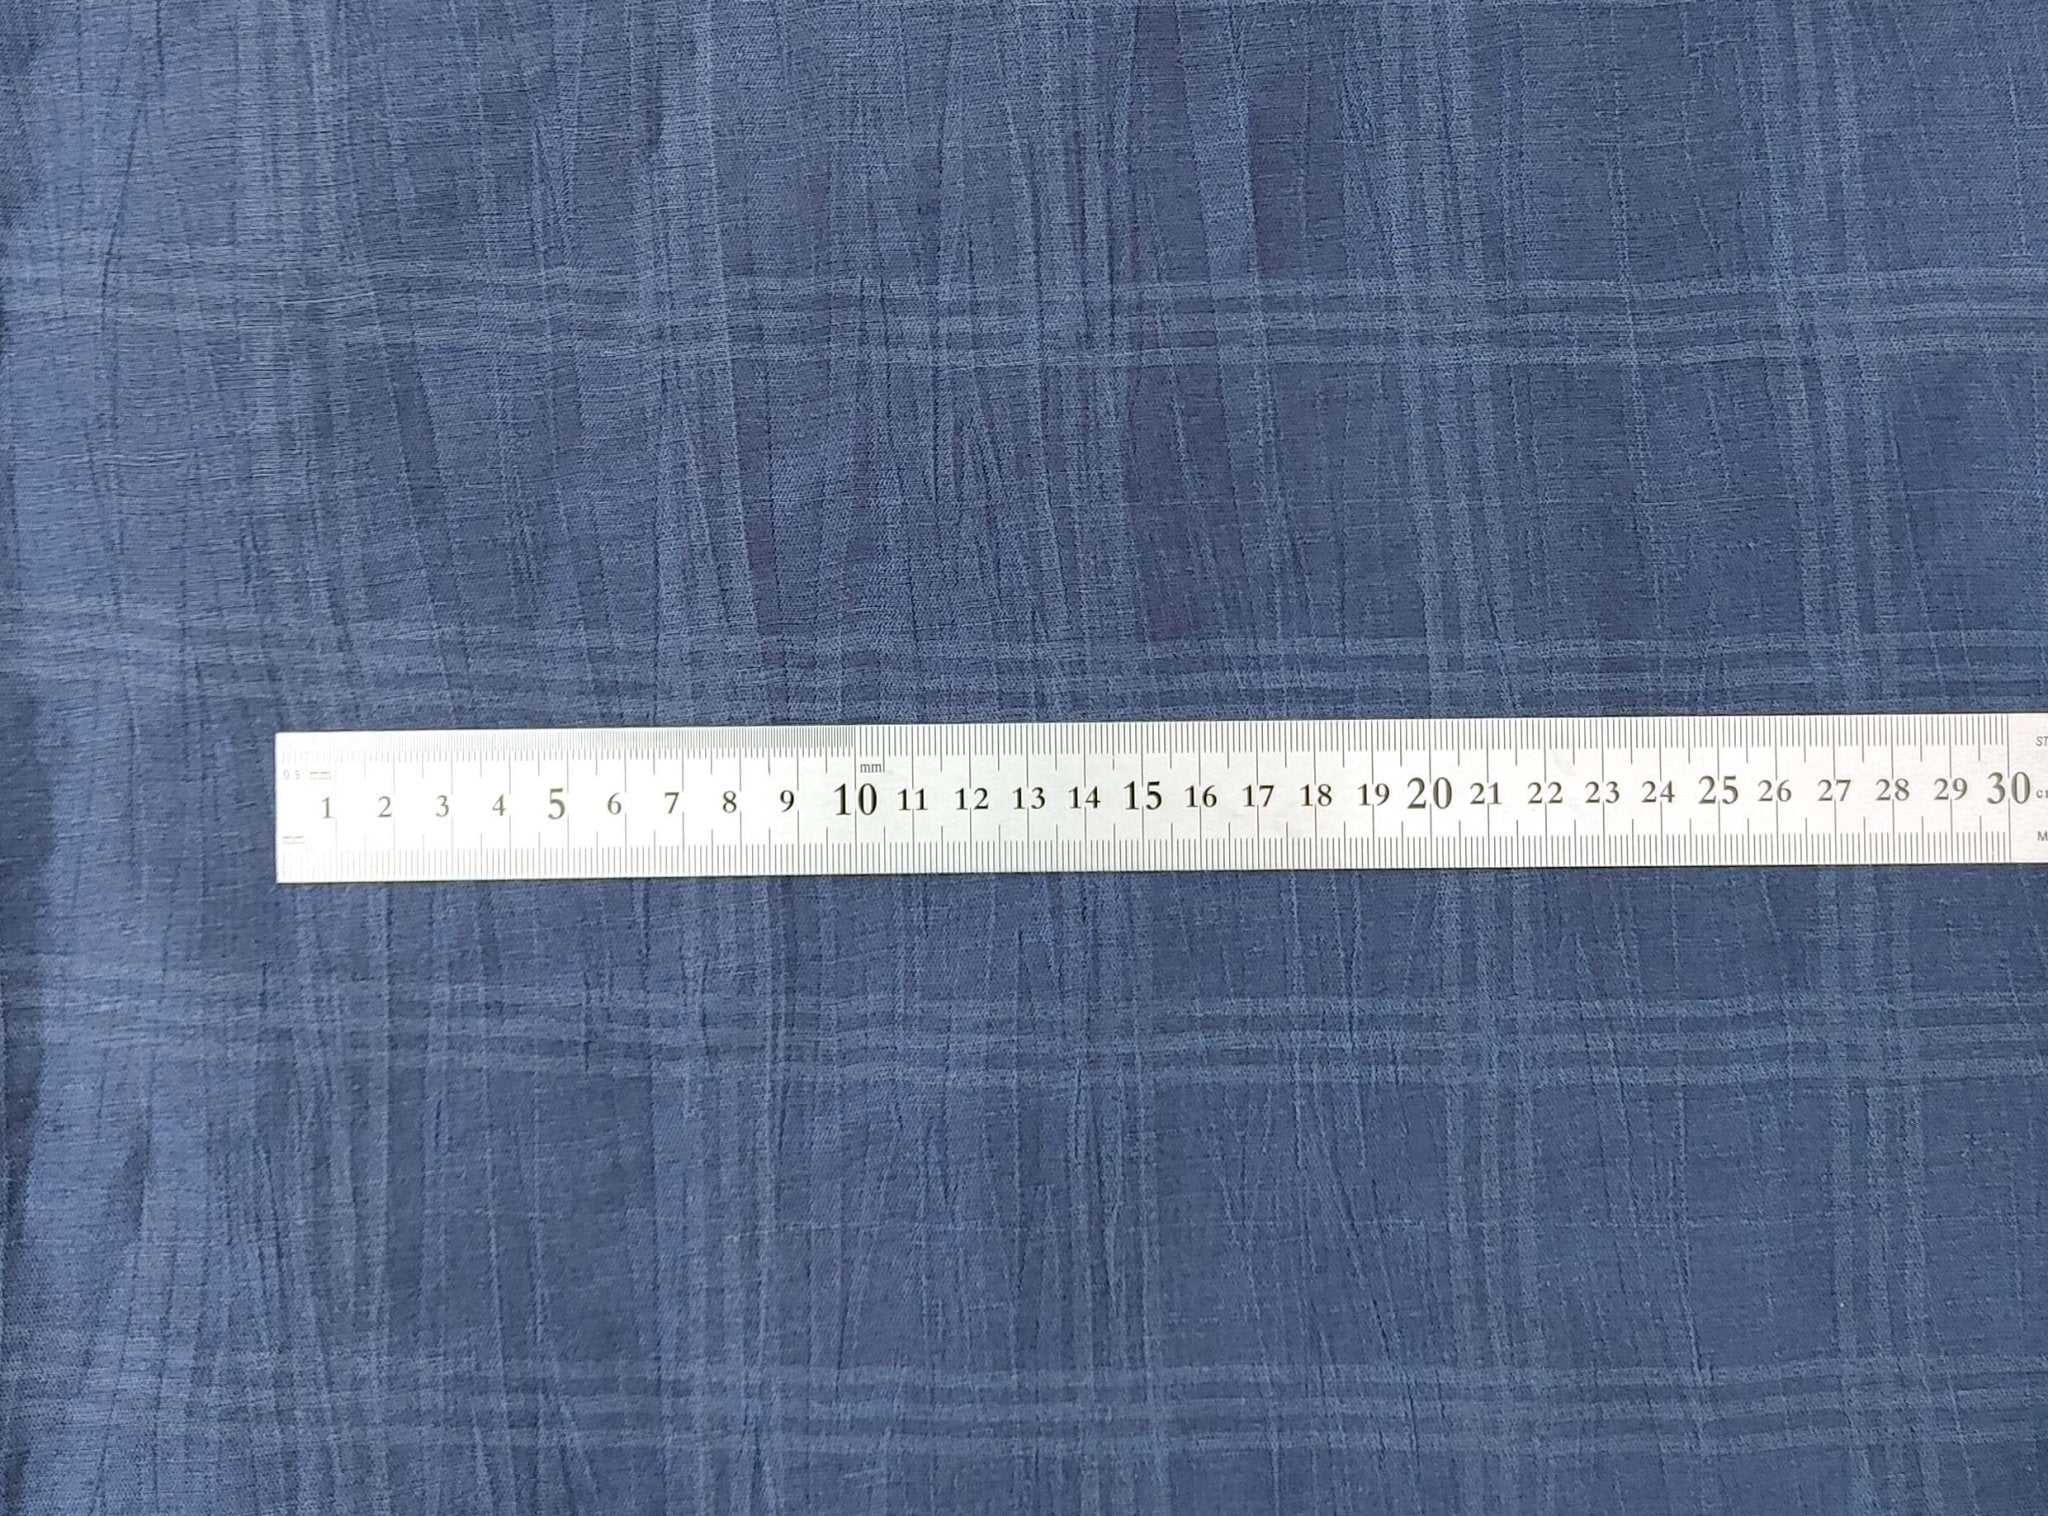 Naval Linen Polyester Fabric with Crease Effect and Printed Plaid Pattern 3578 - The Linen Lab - Navy